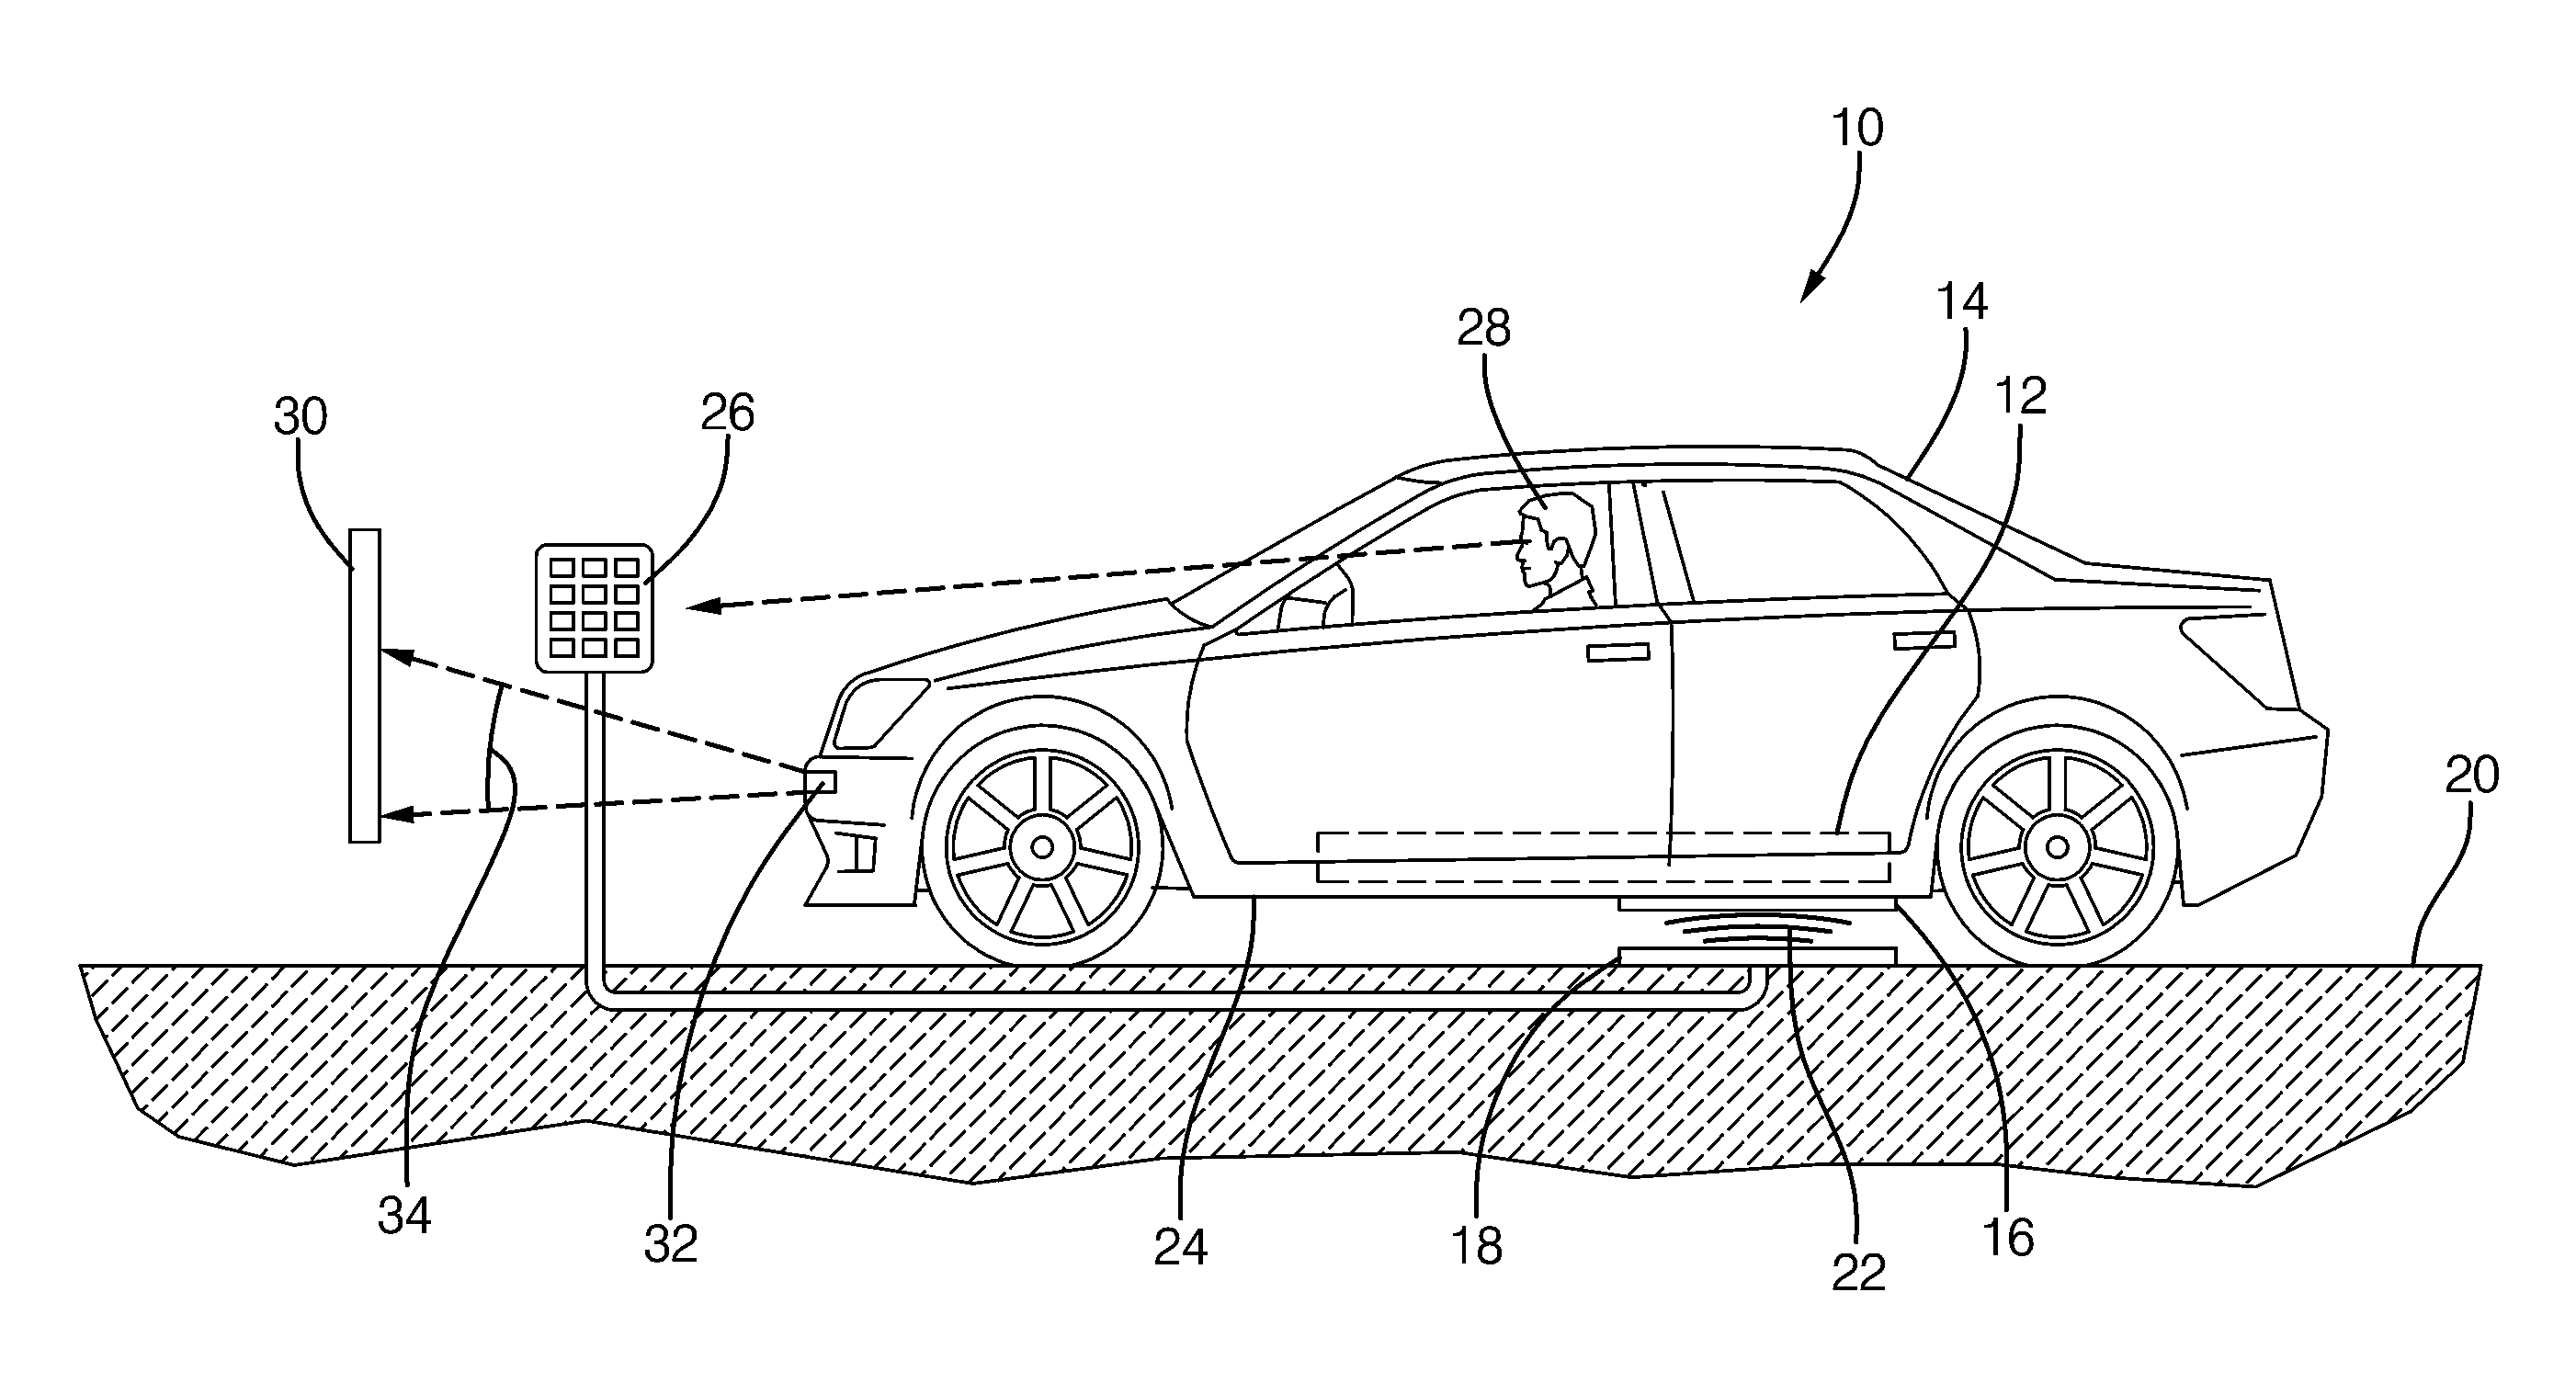 Parking assist for a vehicle equipped with for wireless vehicle charging